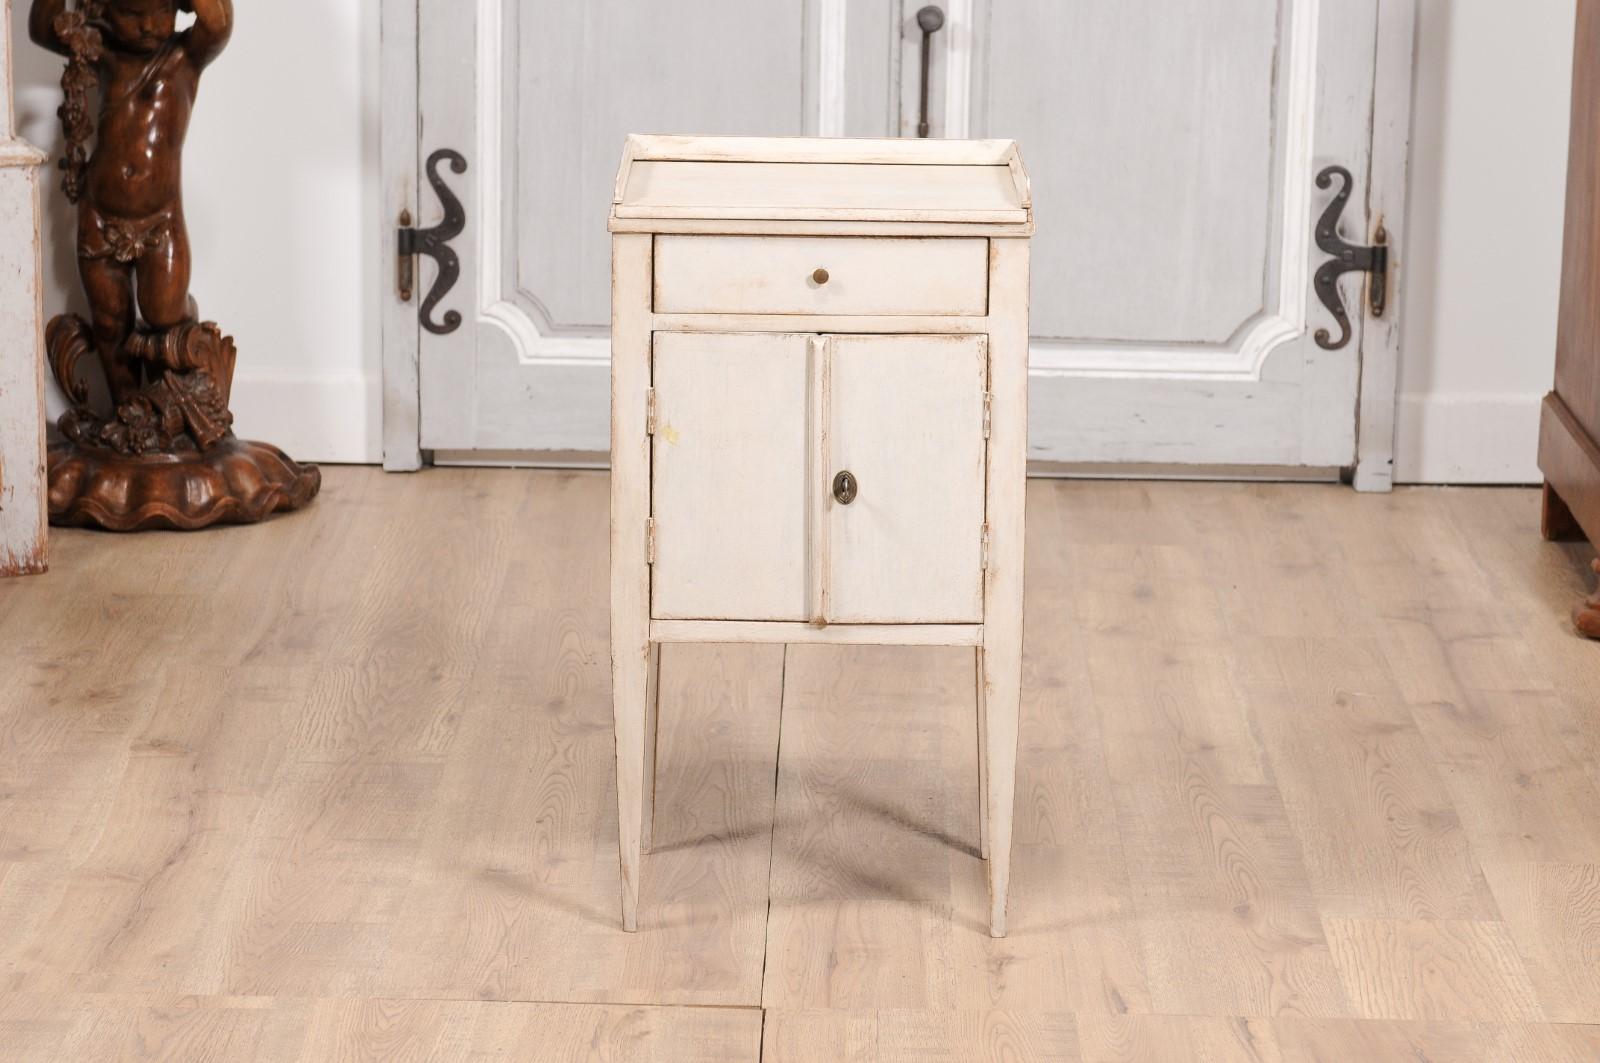 Swedish 19th Century Gray Cream Painted Nightstand with Drawer and Double Doors For Sale 7